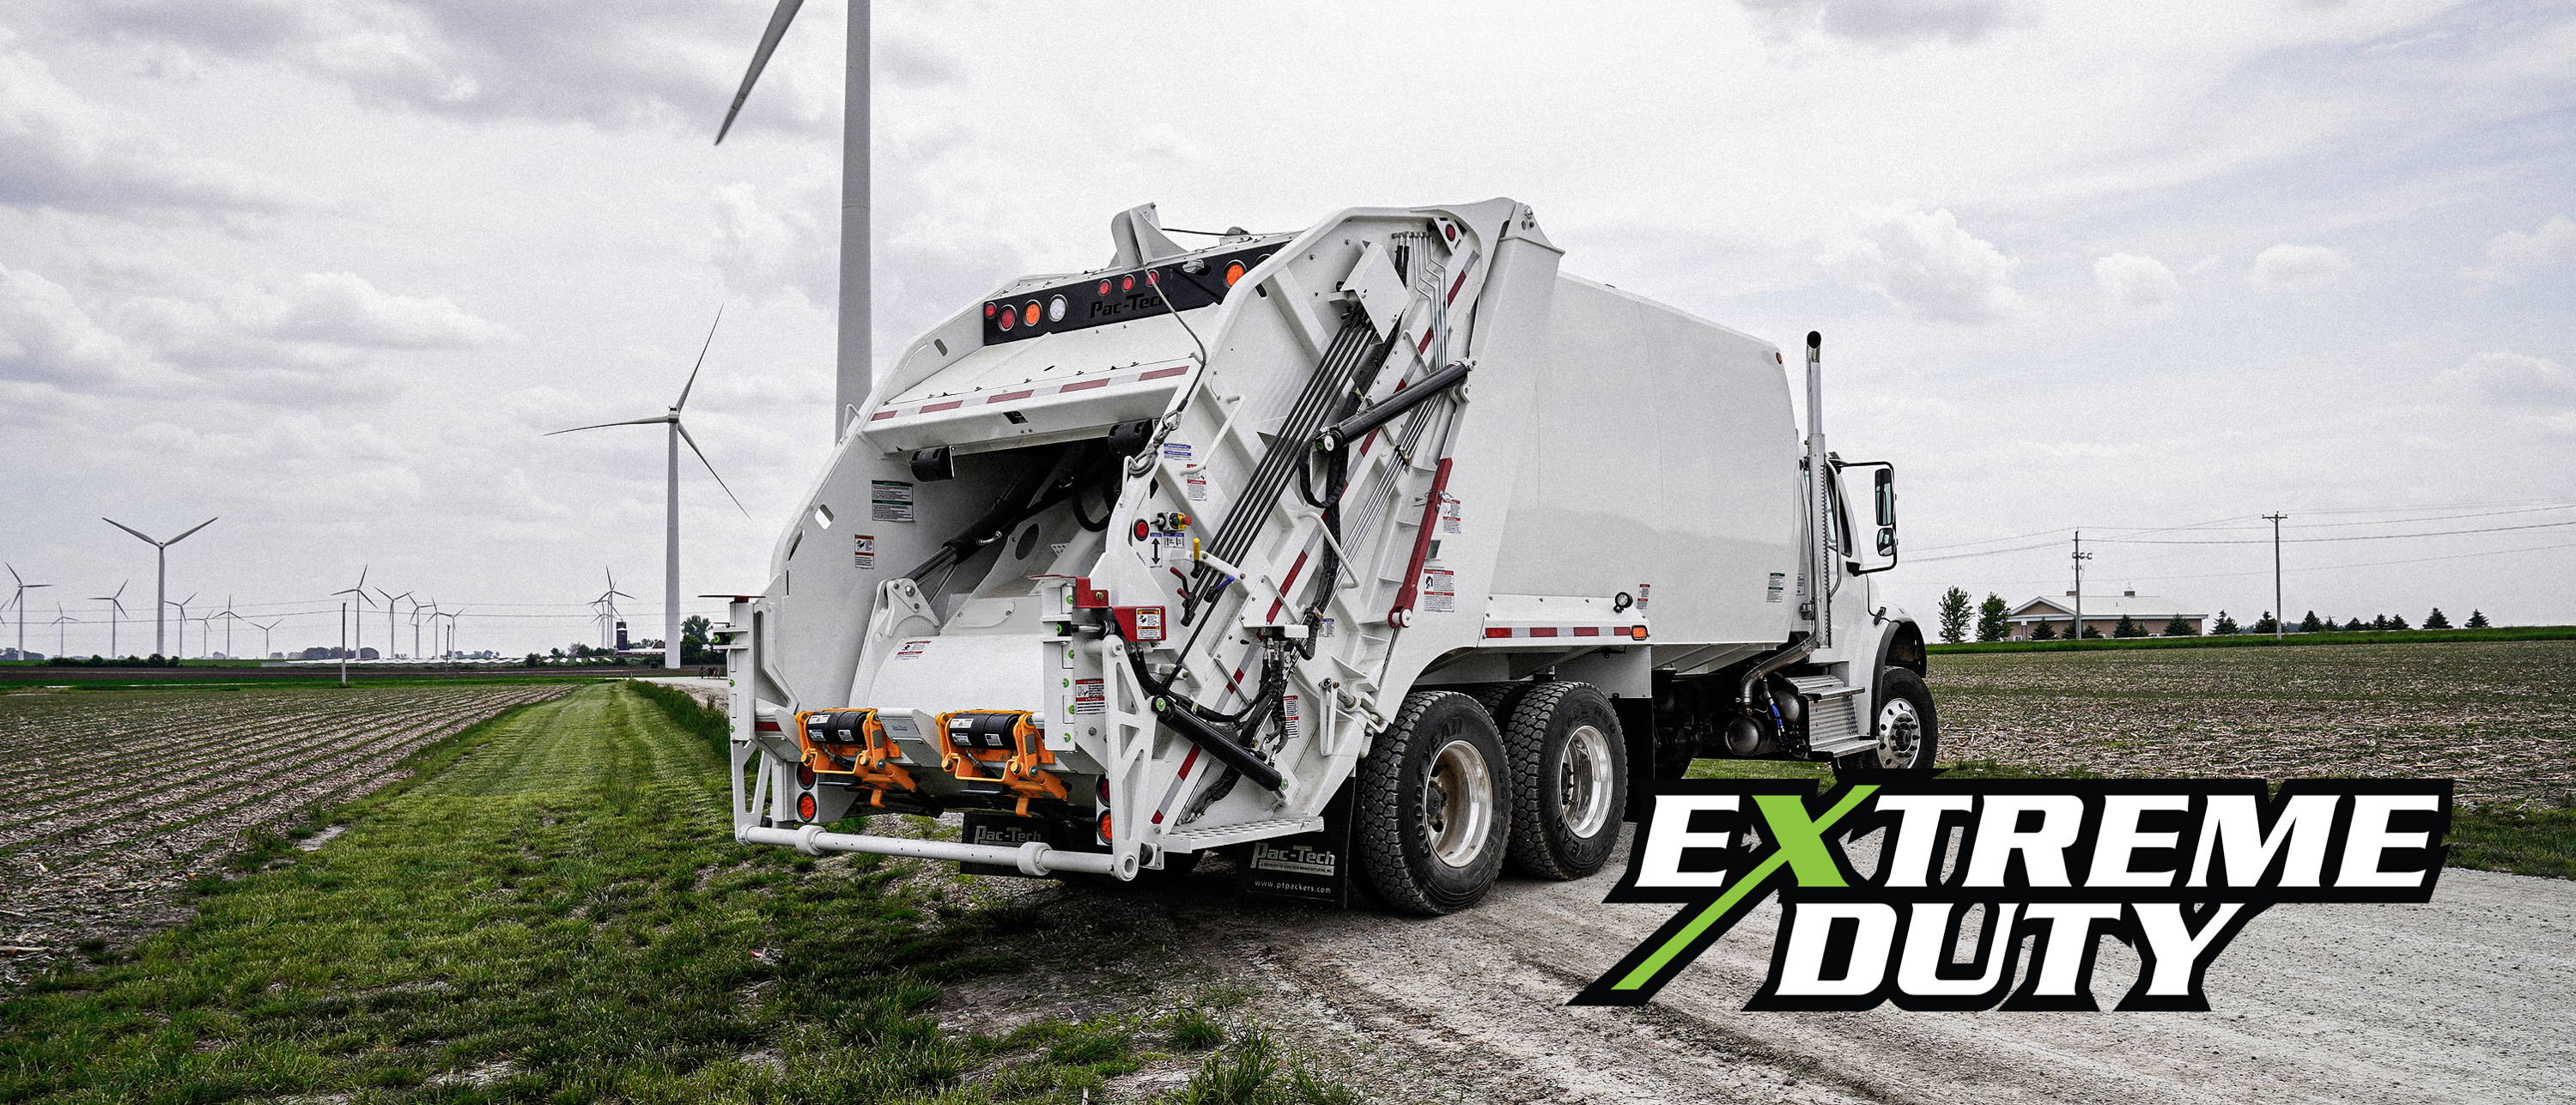 Extreme Duty Rear Loader Refuse Garbage Truck